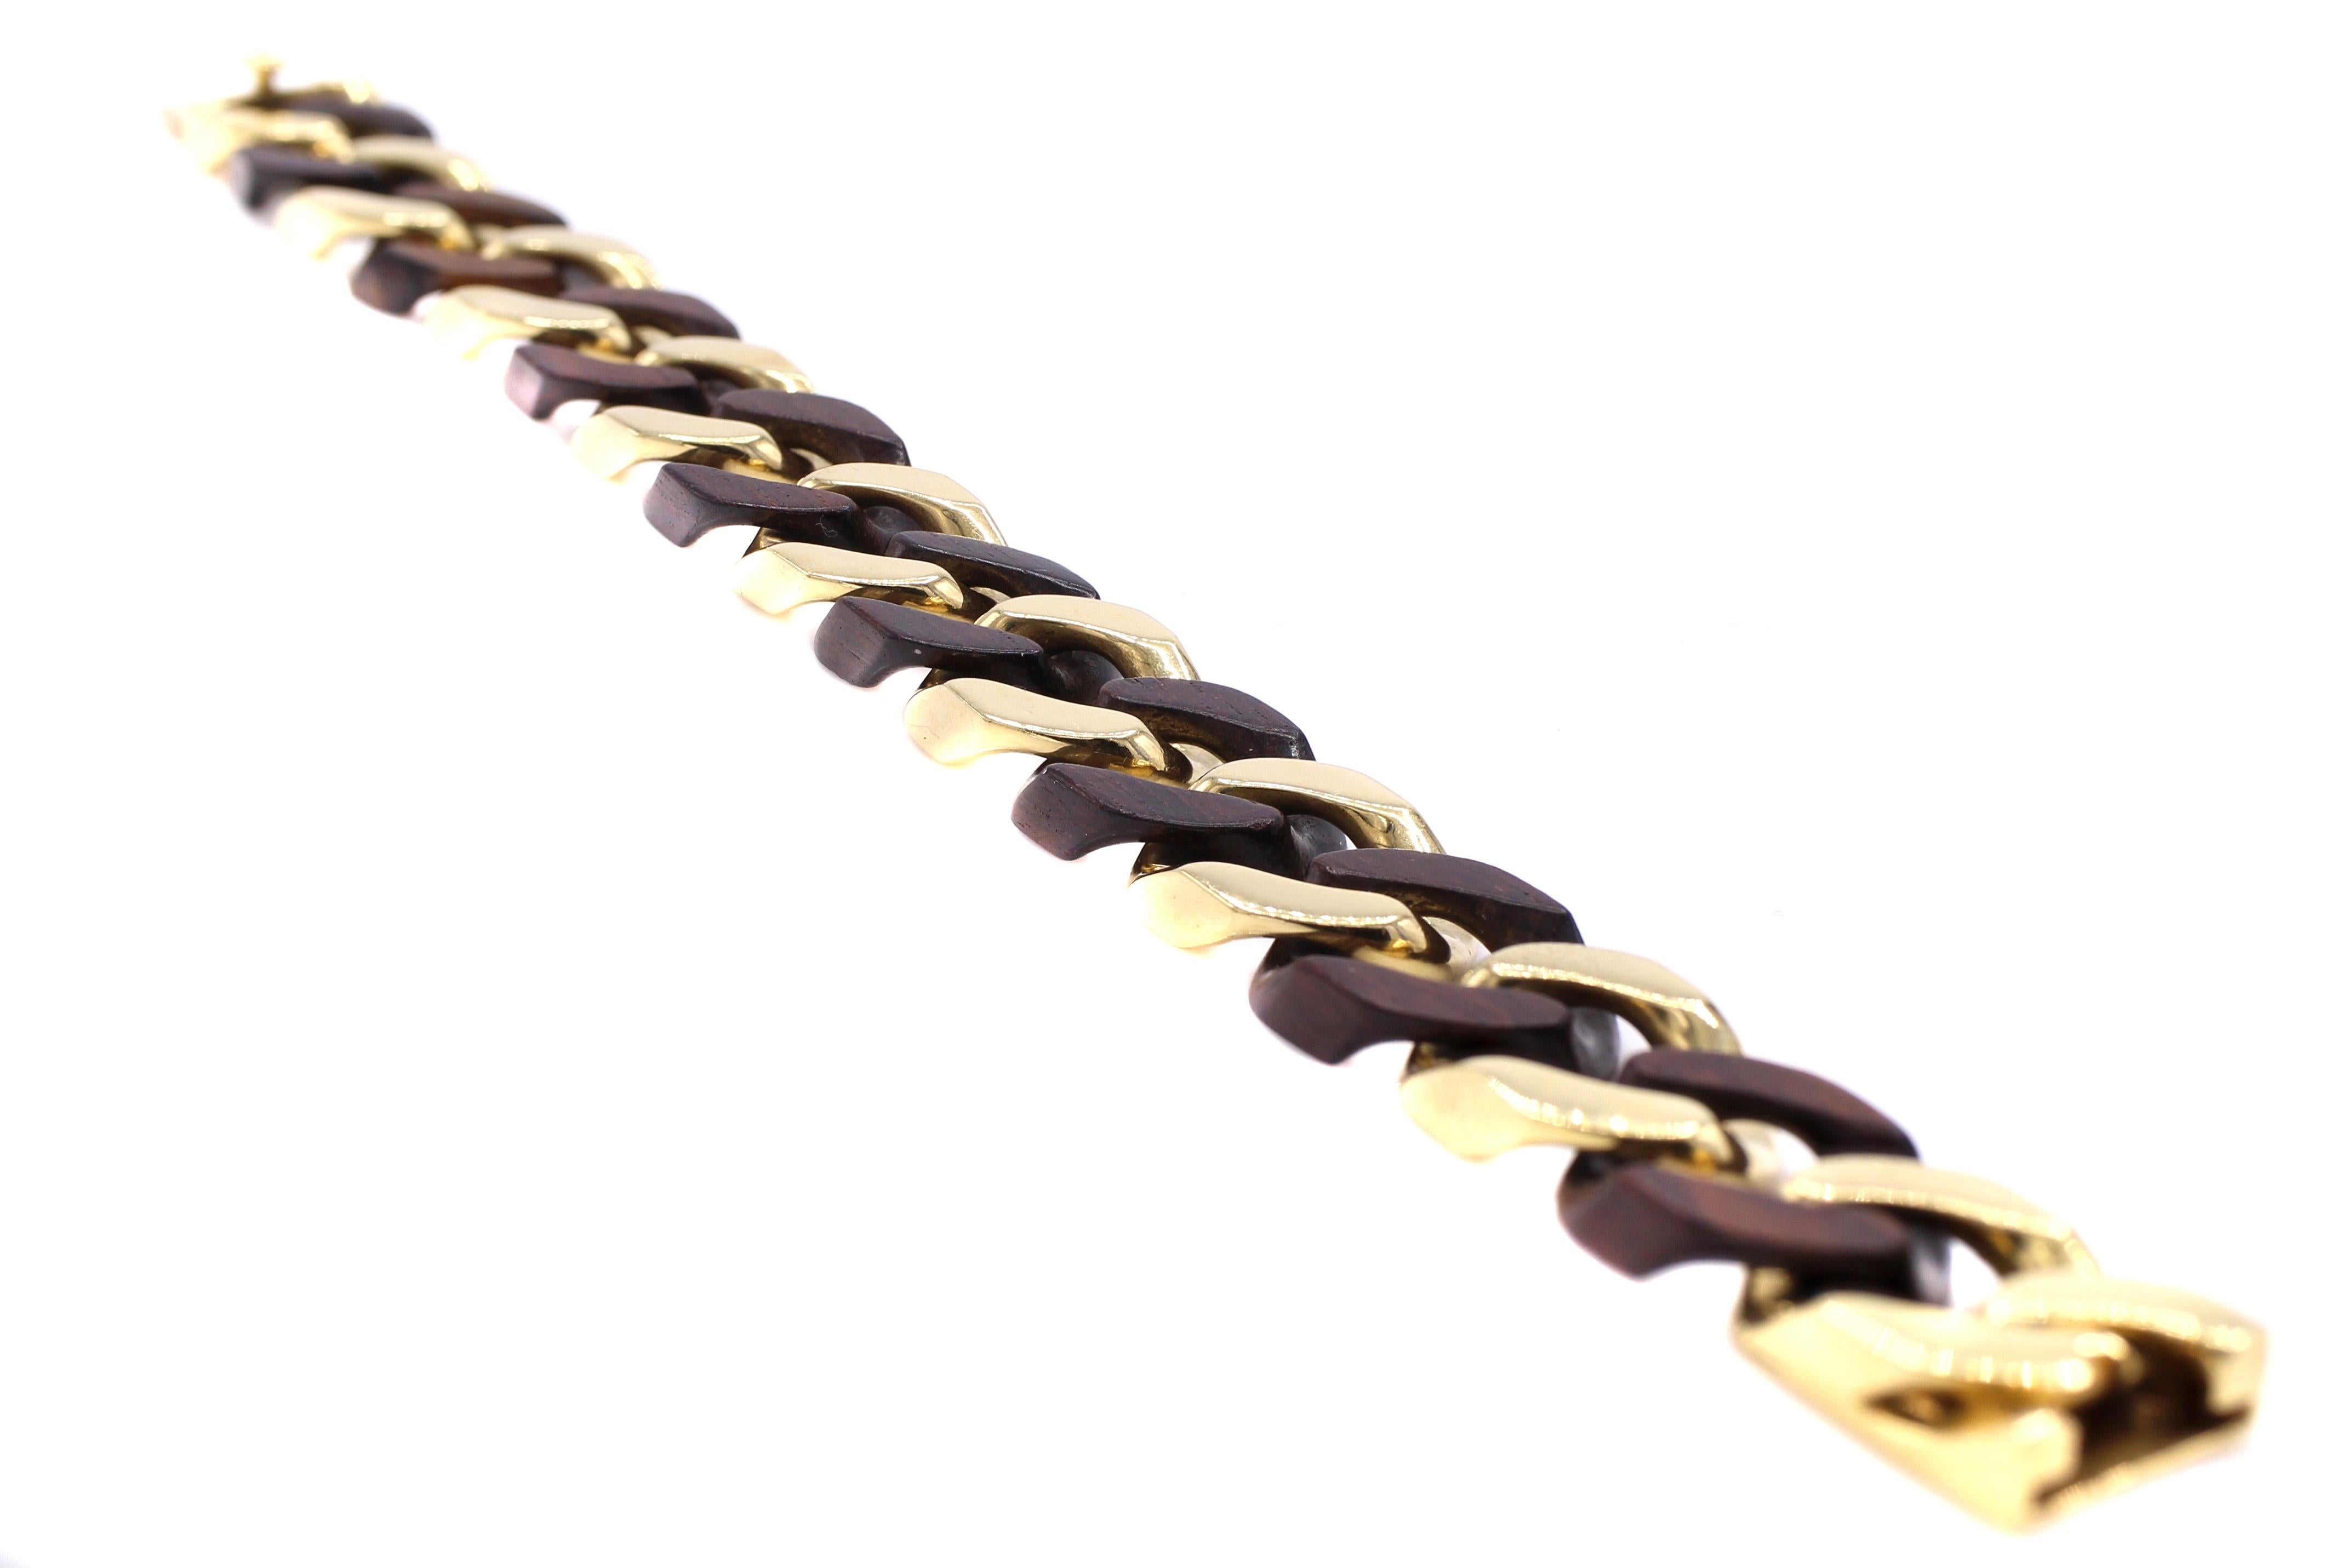 Iconic 1980s wood and 18 karat gold flat curb link bracelet by Van Cleef & Arpels Paris. Signed, numbered with French assay marks and makers marks. Length 7.75 inches